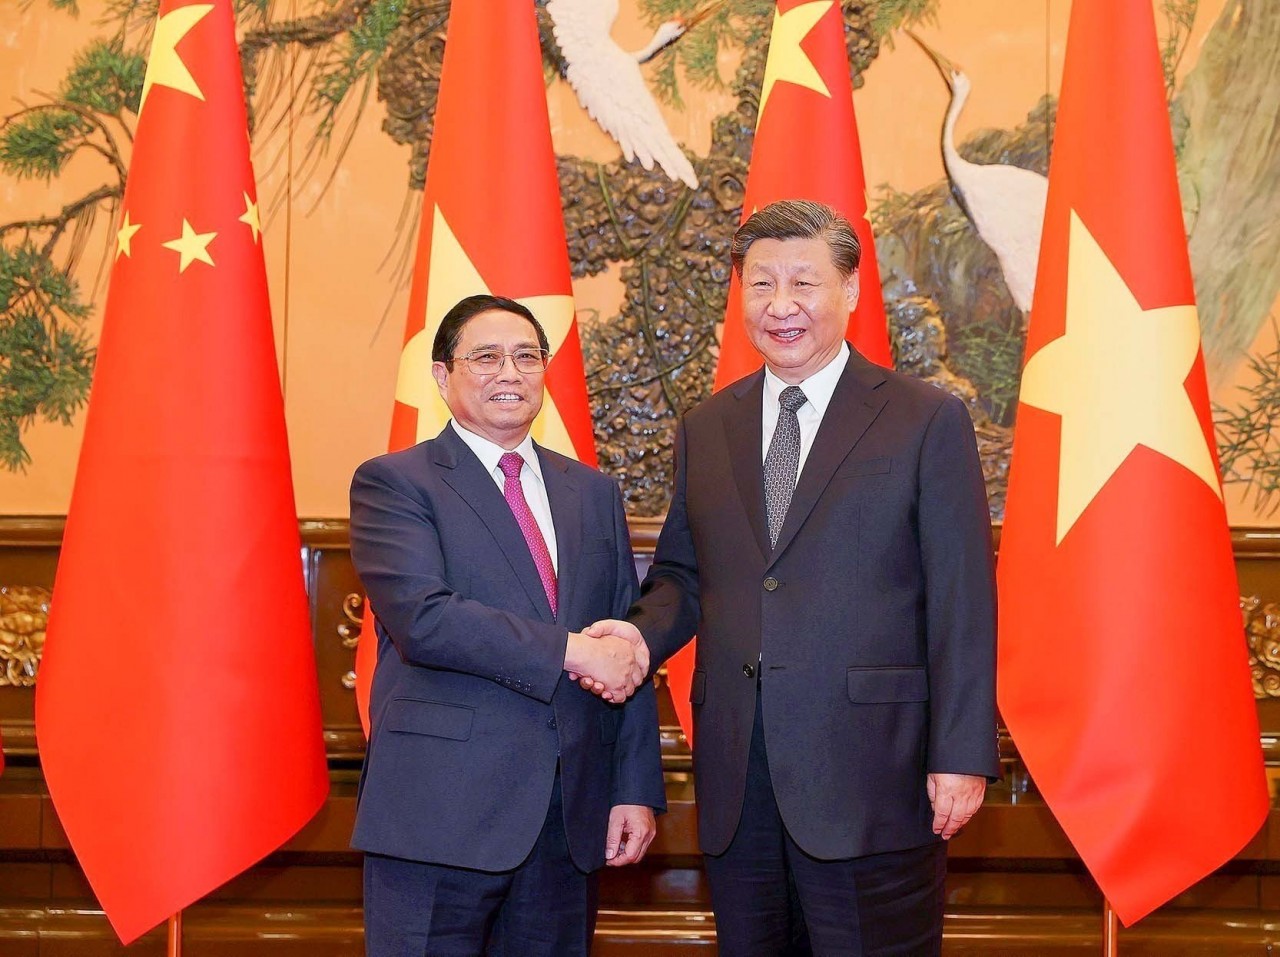 Prime Minister Pham Minh Chinh meets President of China Xi Jinping in Beijing